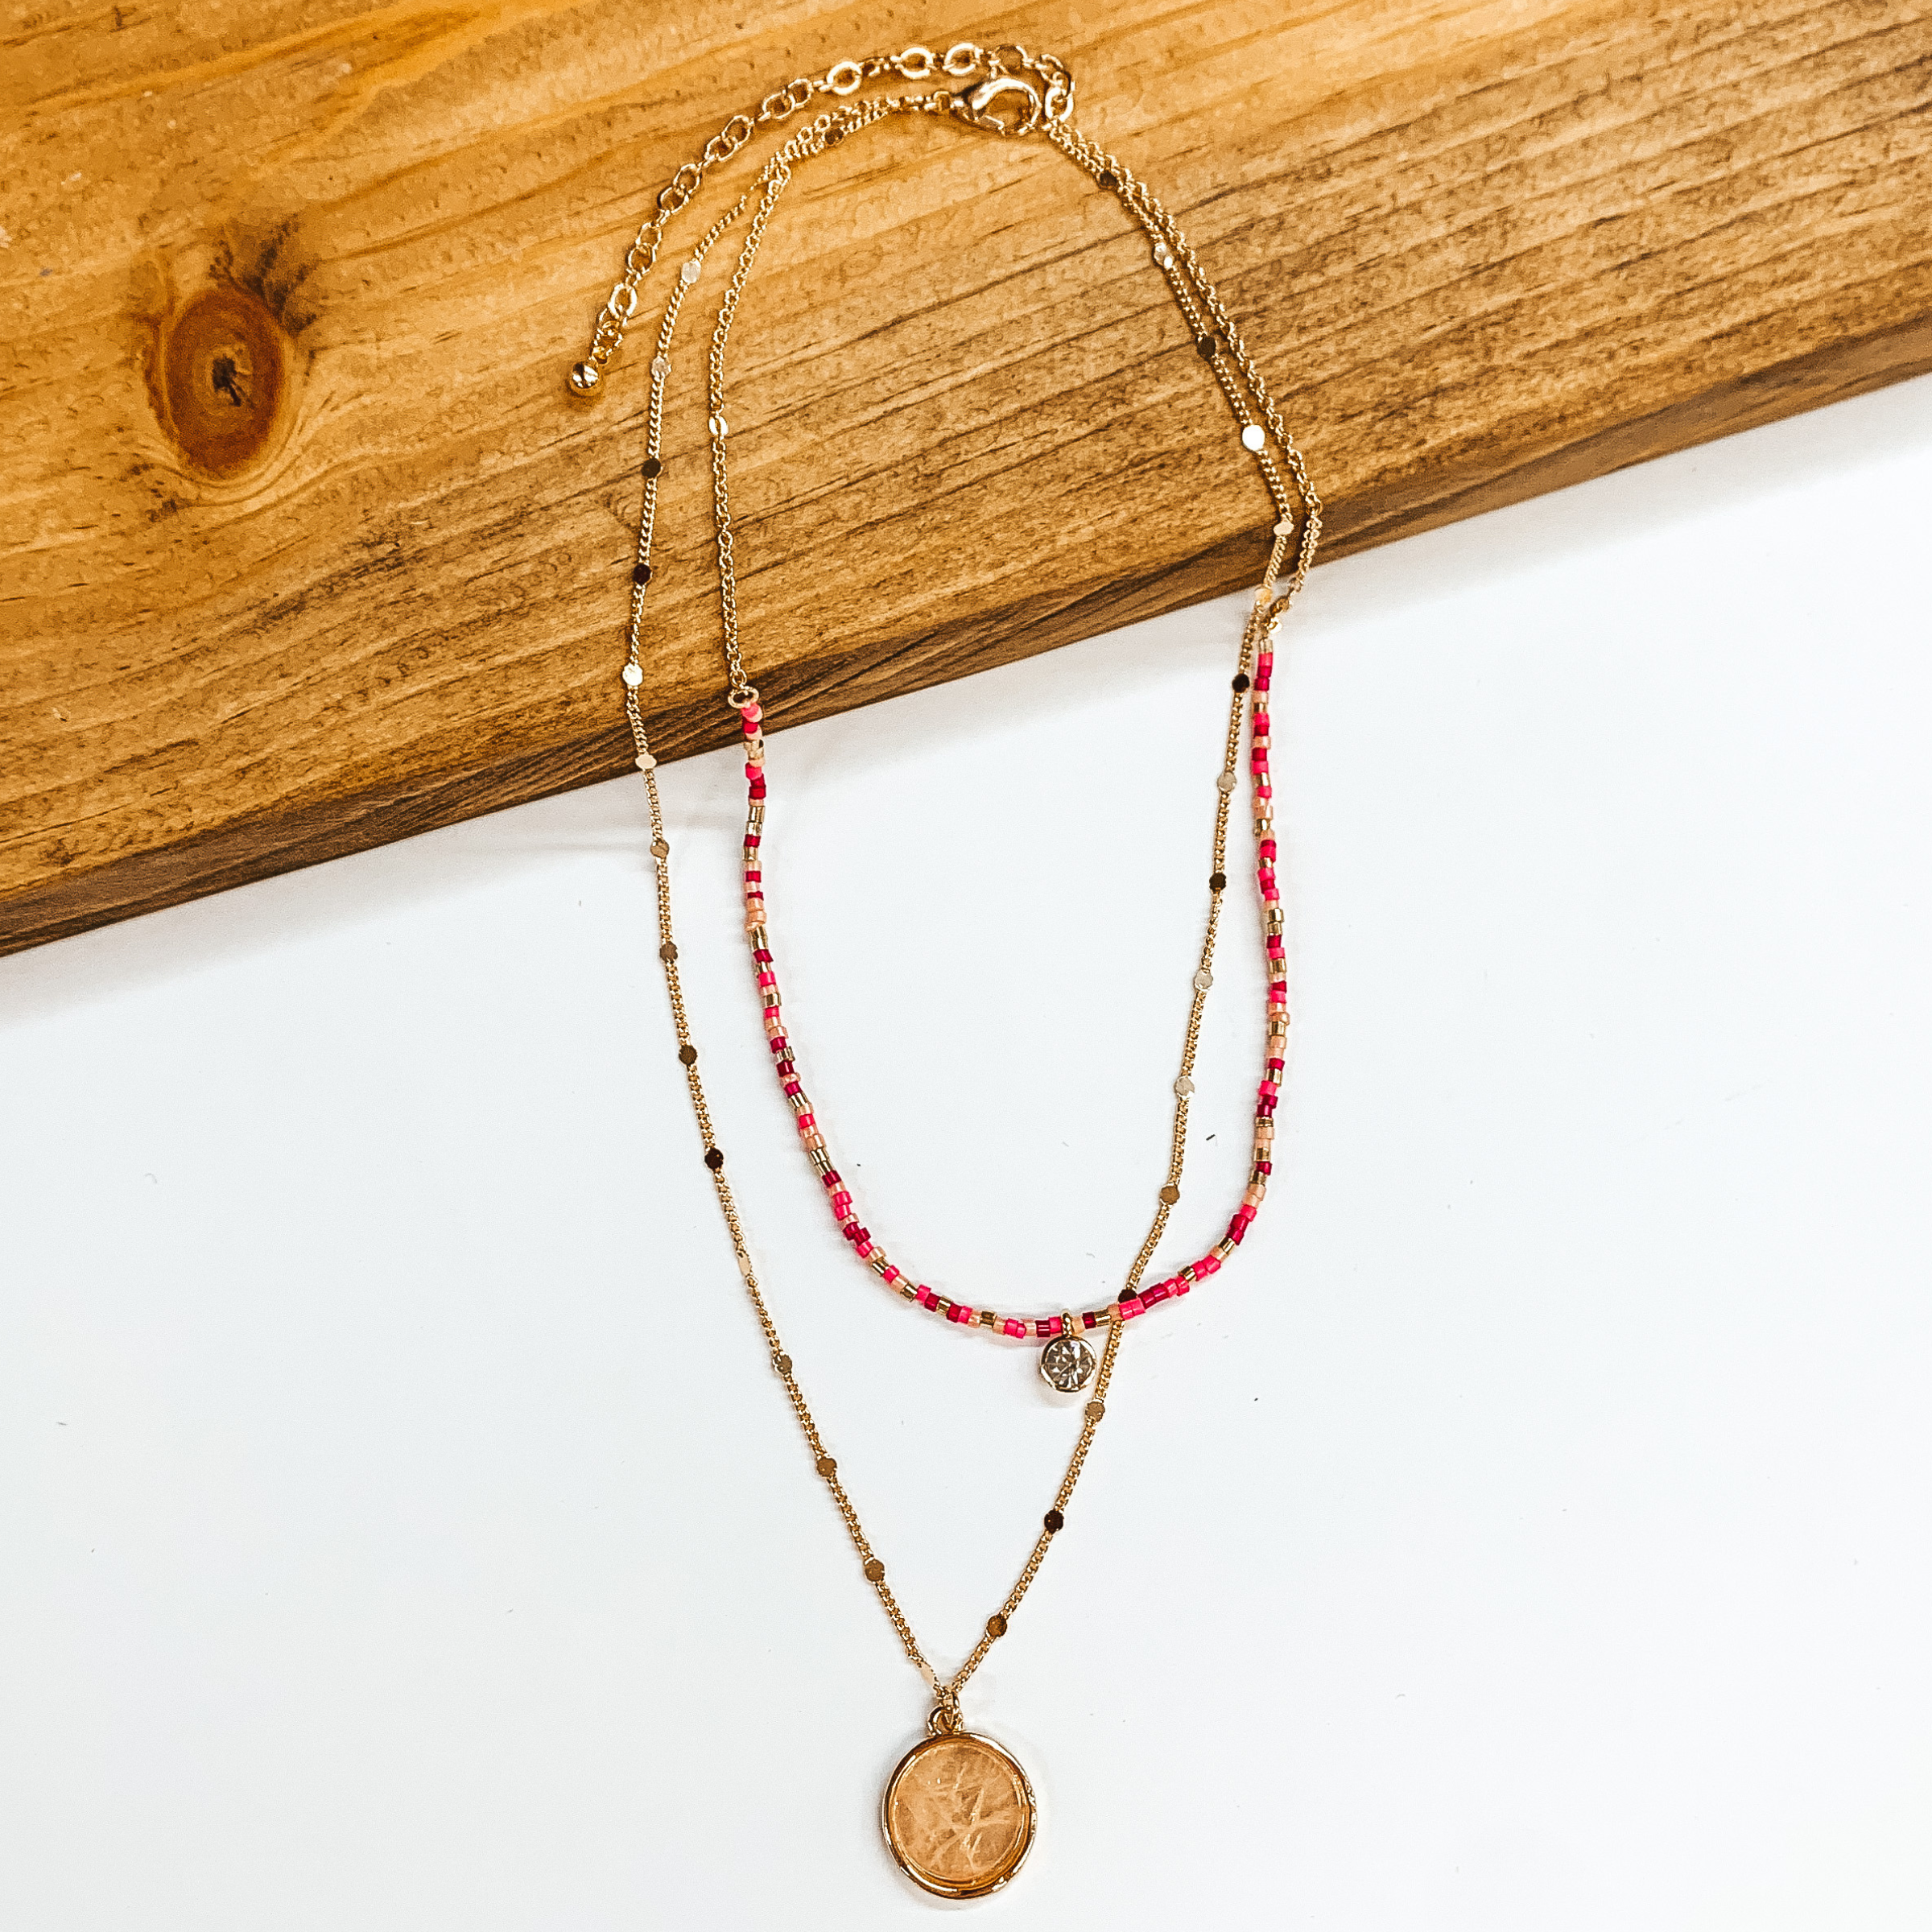 Thank Me Later Double Layered Gold Necklace with Pink Beads and Rose Quarts Pendant - Giddy Up Glamour Boutique